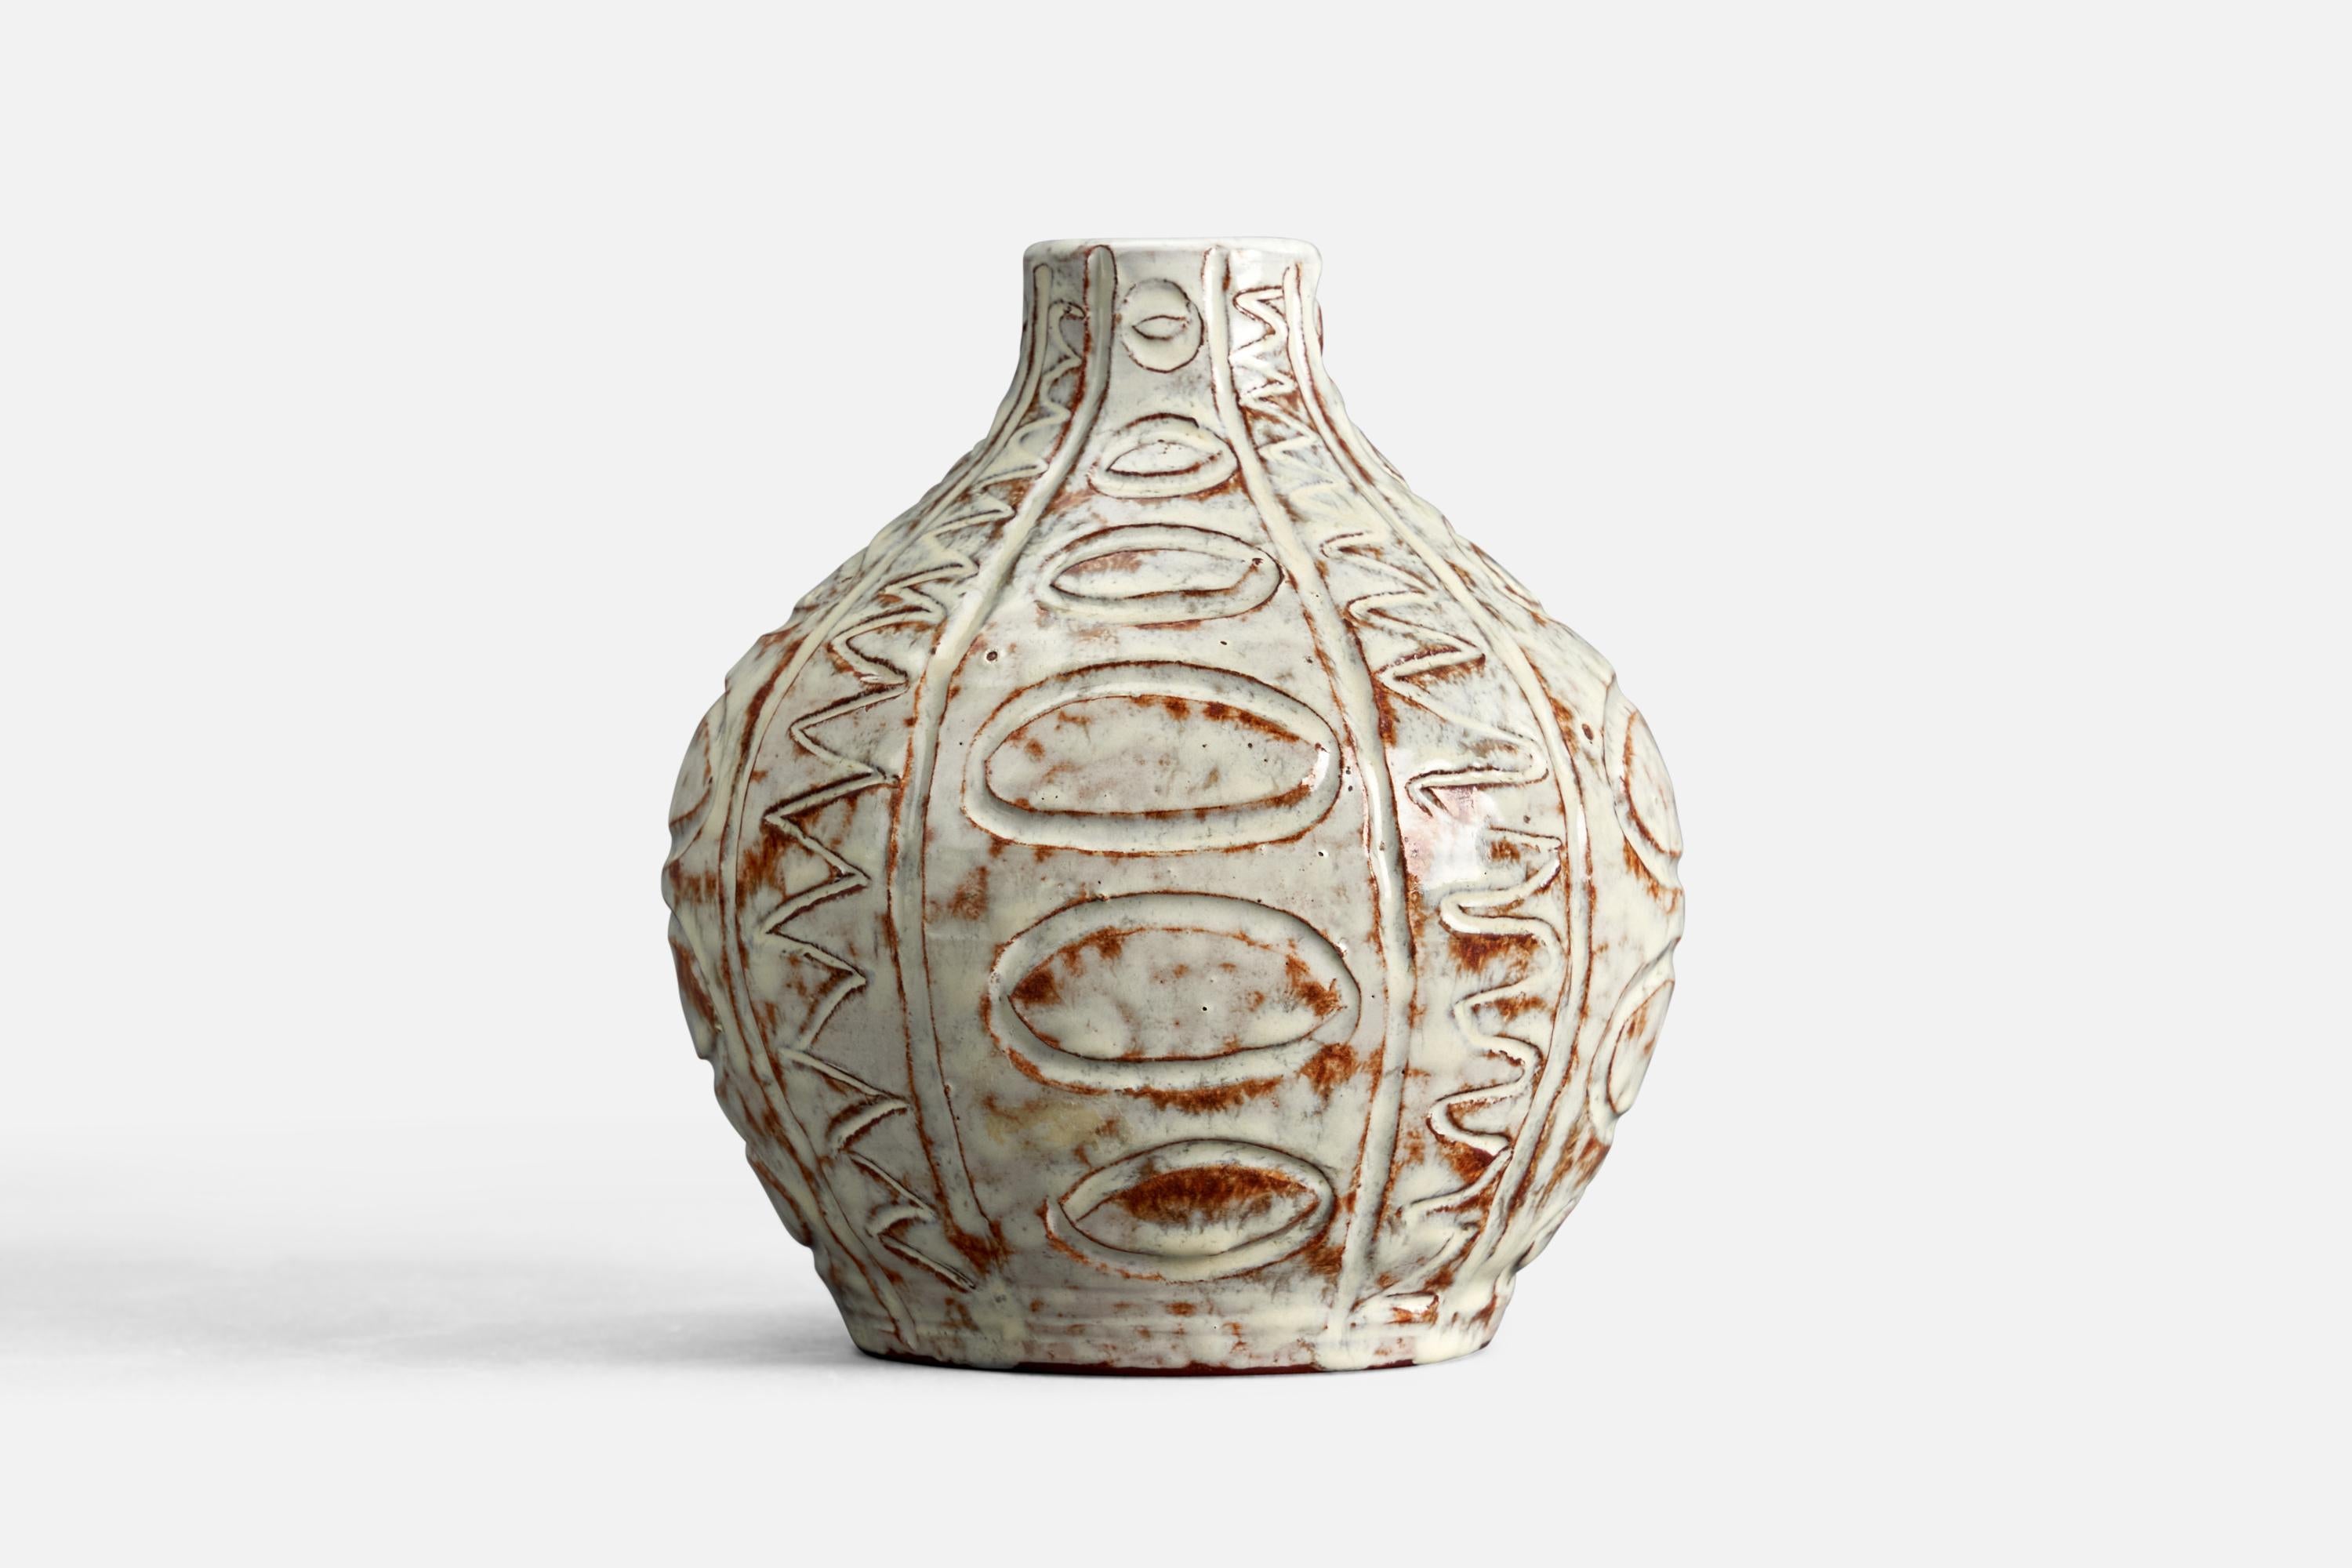 A white-glazed stoneware vase designed by Ovar Nilsson and produced in Höganäs, Sweden, 1960s.